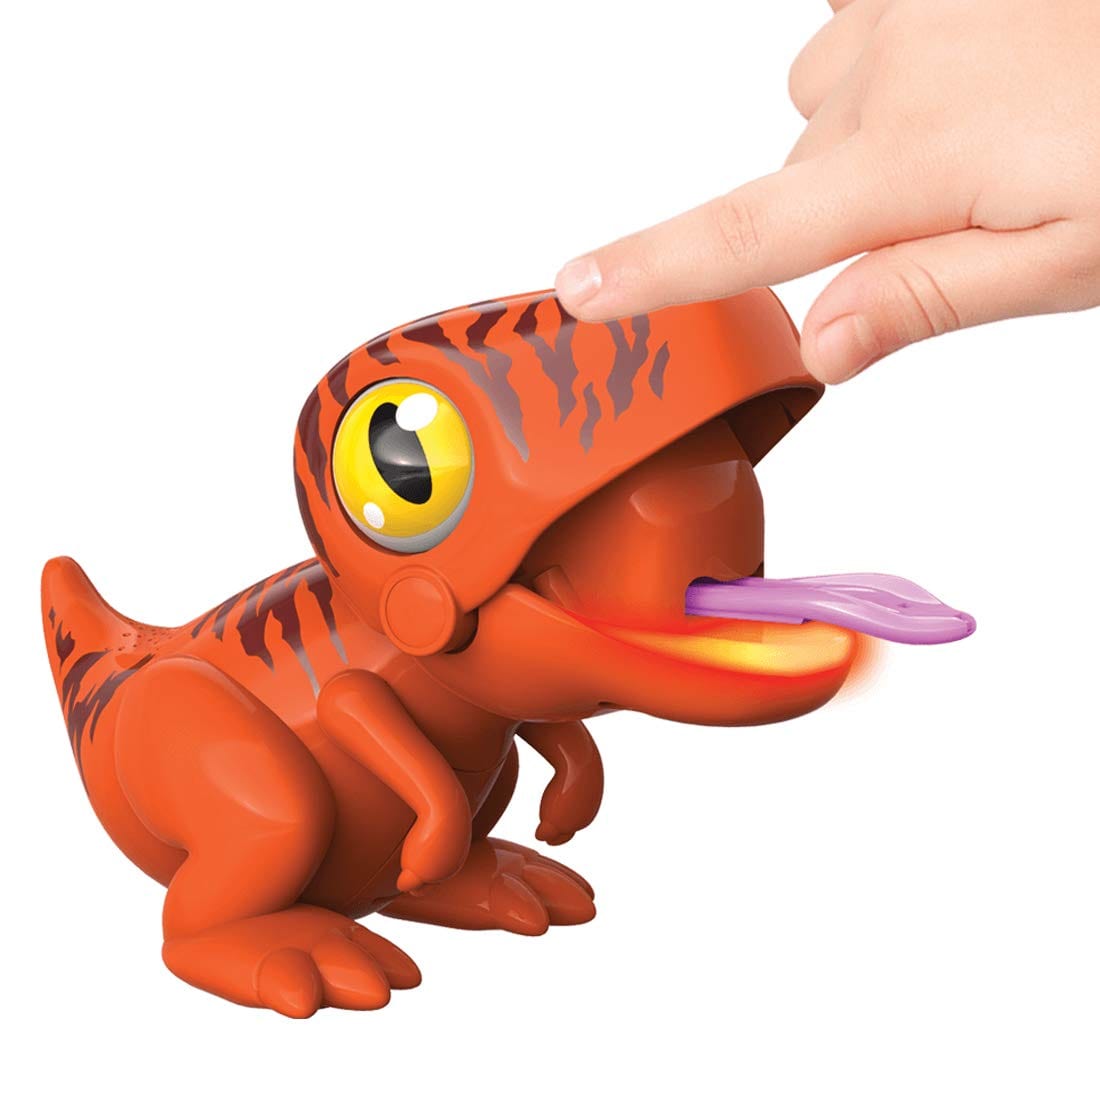 Ycoo Gloopies Dino; Gloopies- POW; Tongues of Surprises, Sound Effects for 6 Emotions, Light Effect by Silverlit Toys Hong Kong Toy